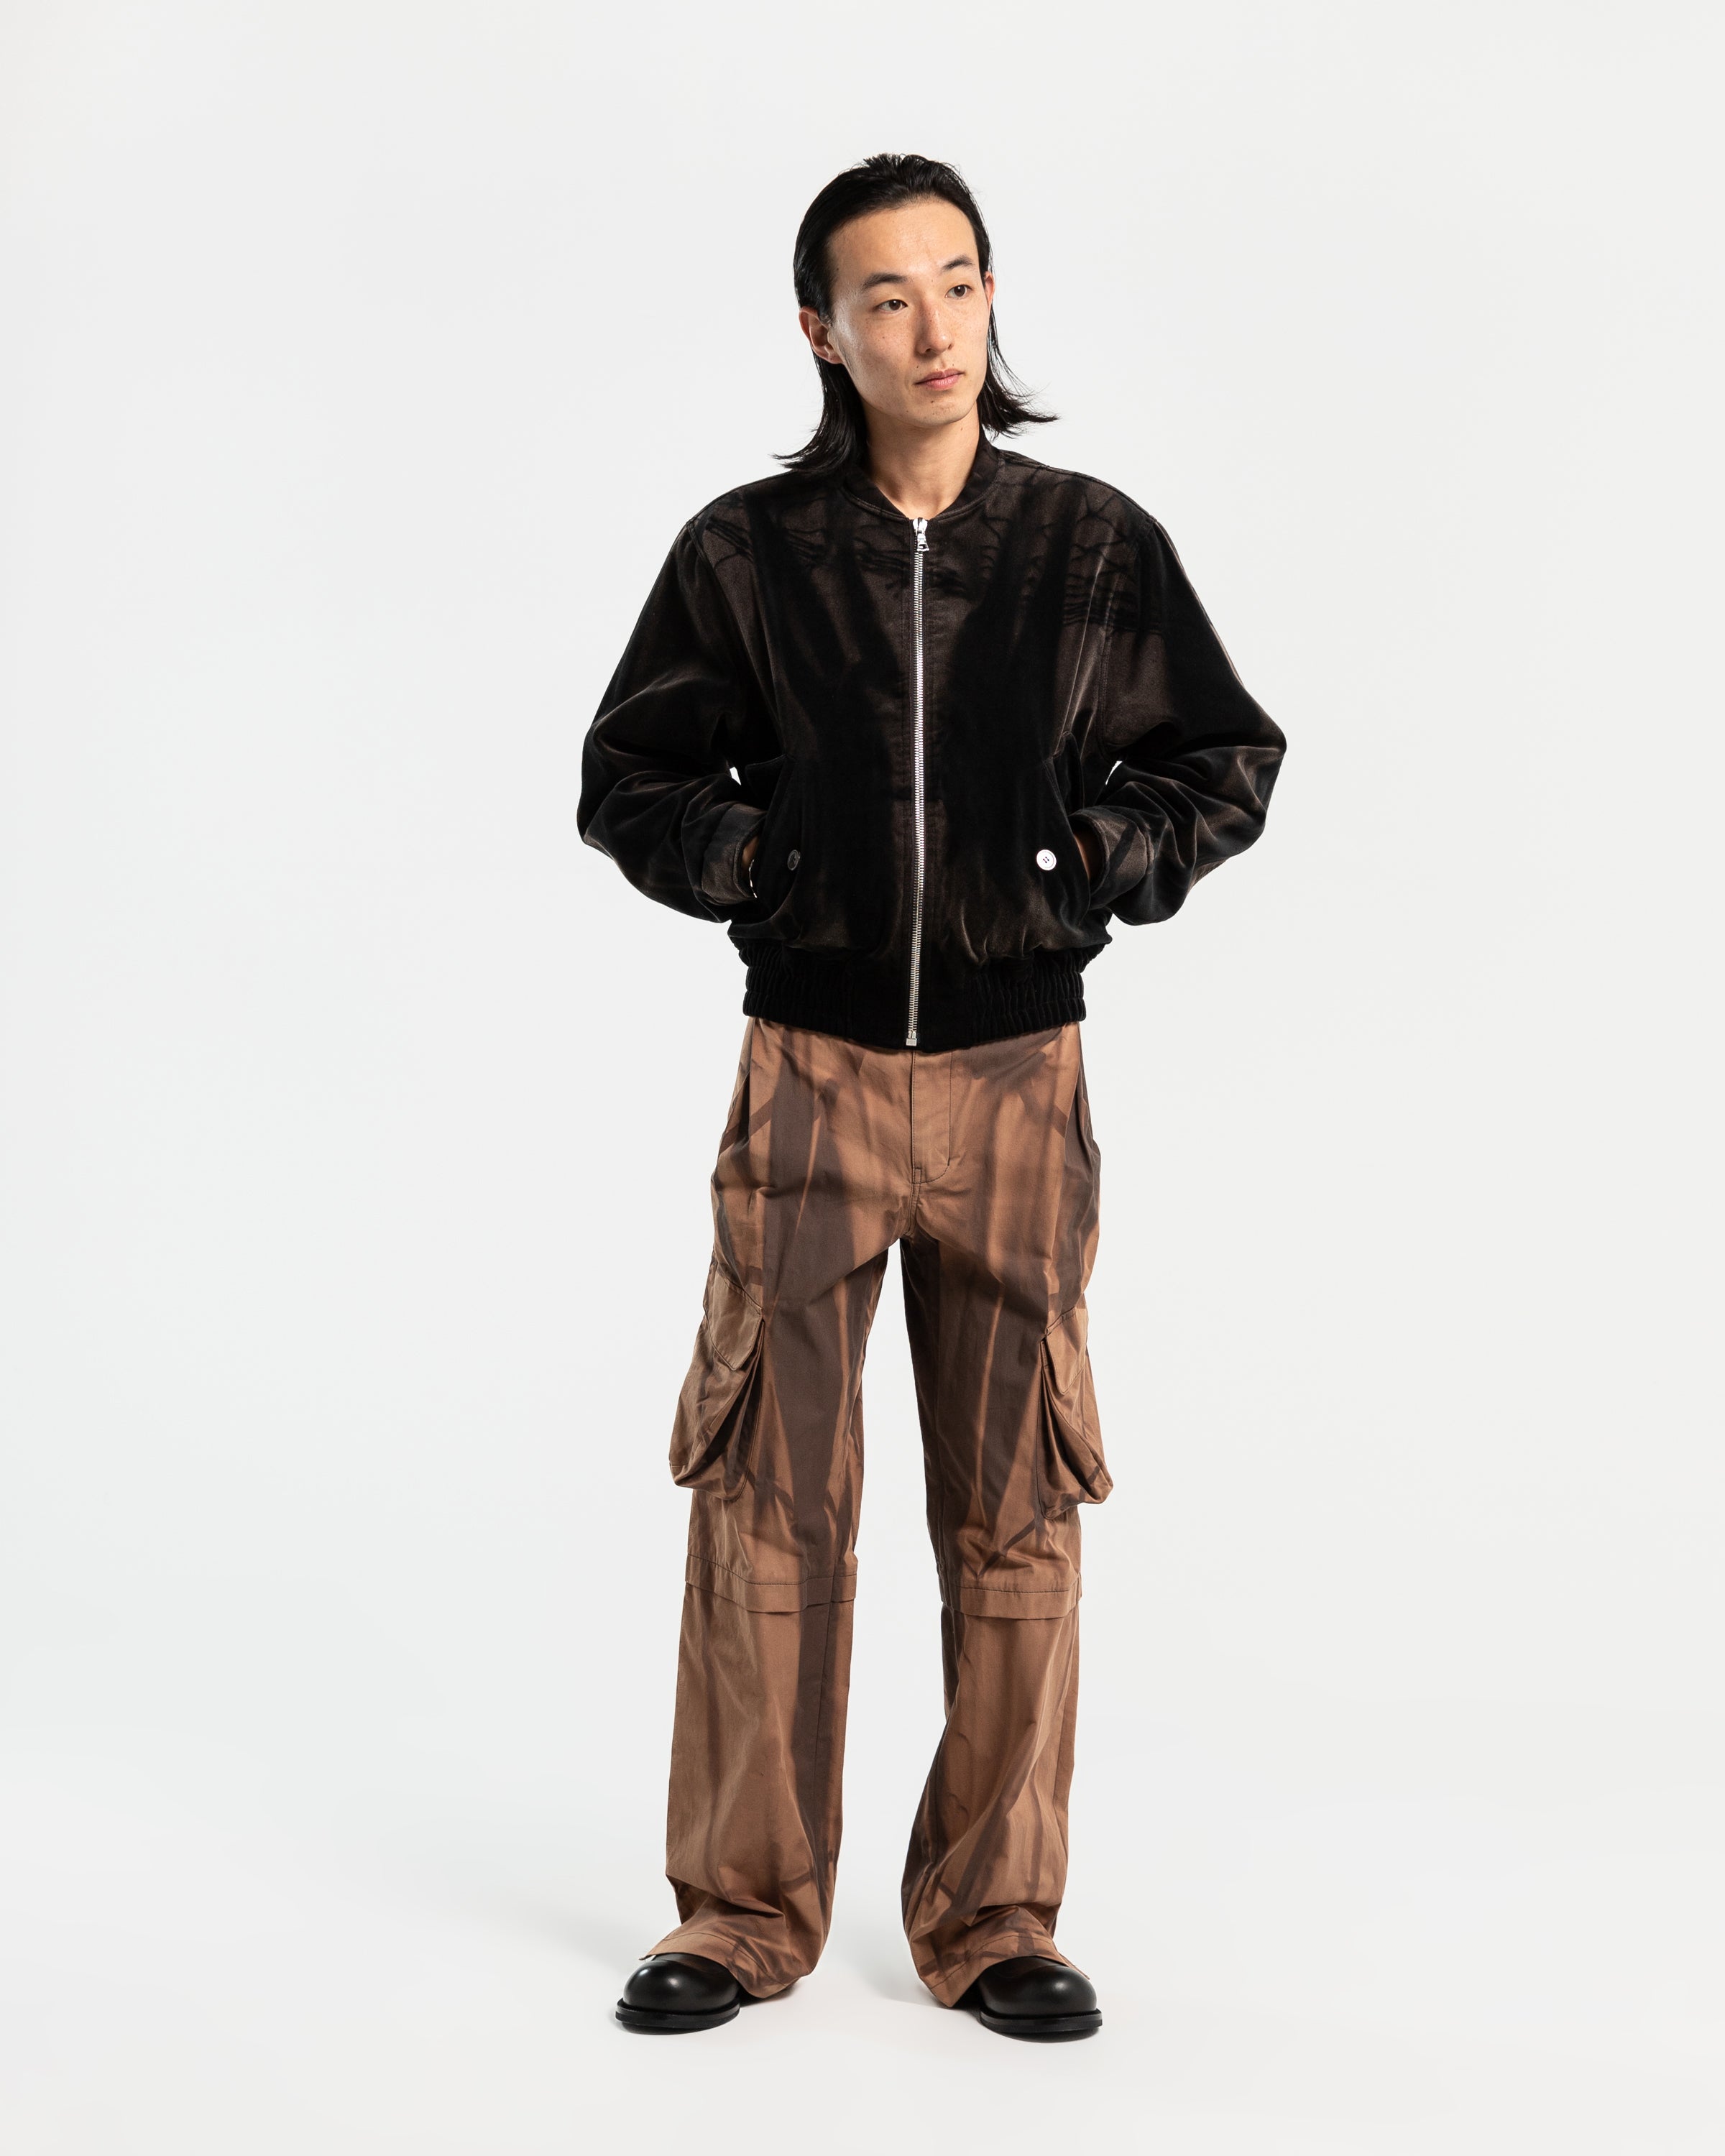 3D Pocket Layered Trousers in Brown